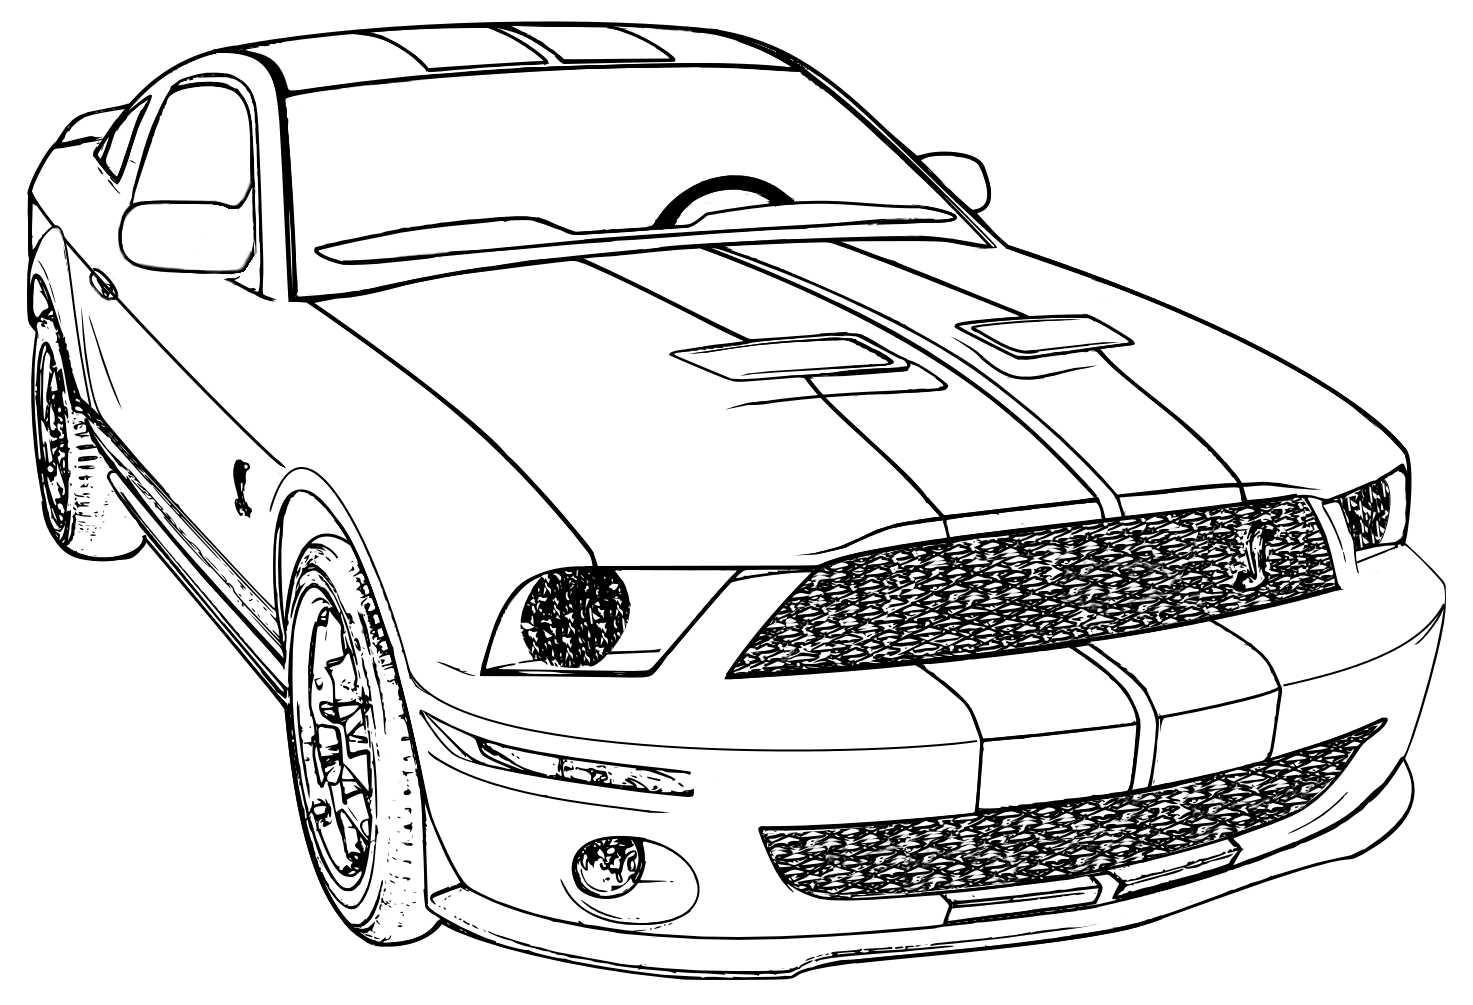 Printable Mustang Car Coloring Pages - High Quality Coloring Pages